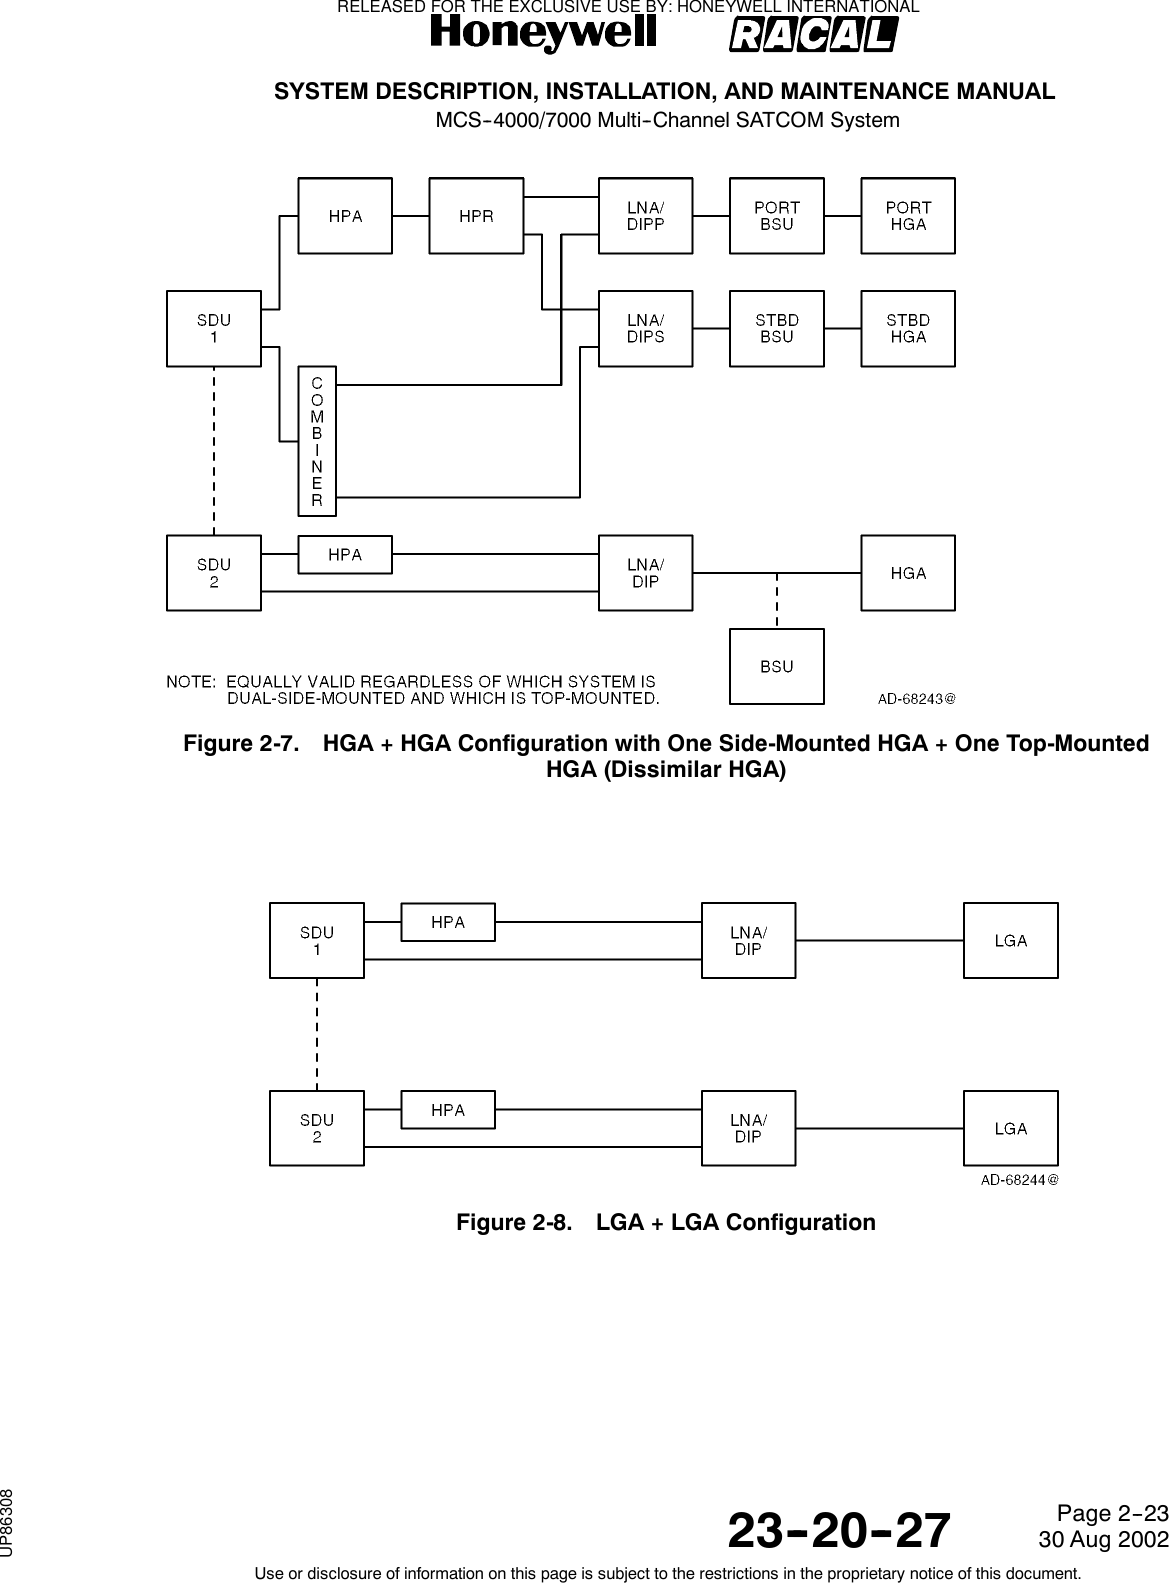 SYSTEM DESCRIPTION, INSTALLATION, AND MAINTENANCE MANUALMCS--4000/7000 Multi--Channel SATCOM System23--20--2730 Aug 2002Use or disclosure of information on this page is subject to the restrictions in the proprietary notice of this document.Page 2--23Figure 2-7. HGA + HGA Configuration with One Side-Mounted HGA + One Top-MountedHGA (Dissimilar HGA)Figure 2-8. LGA + LGA ConfigurationRELEASED FOR THE EXCLUSIVE USE BY: HONEYWELL INTERNATIONALUP86308